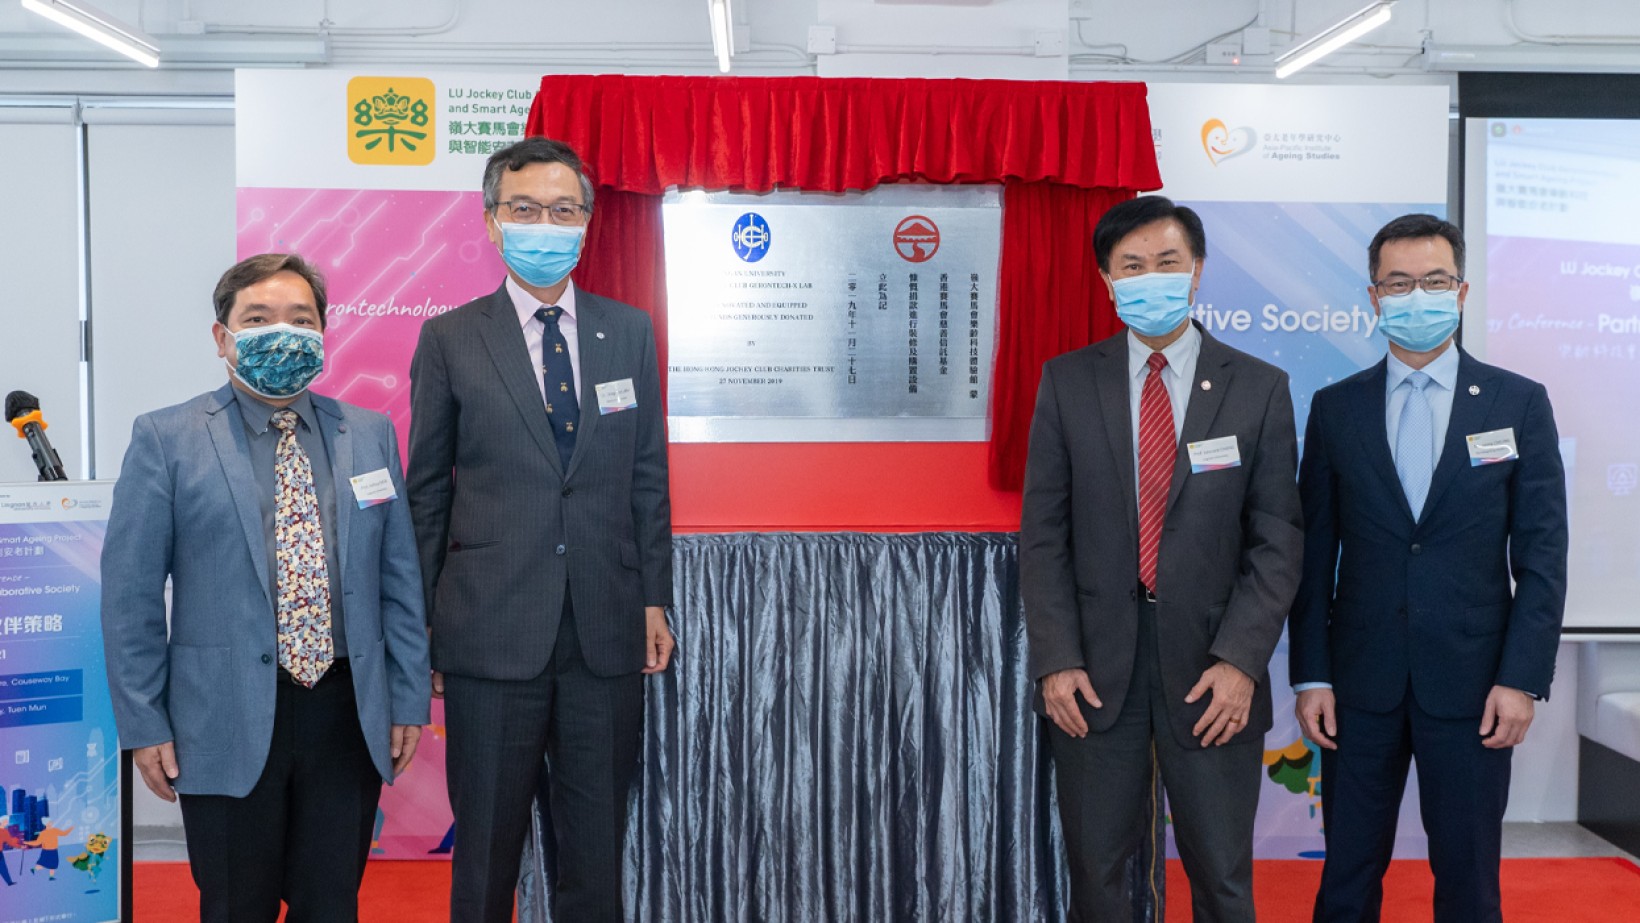 Lingnan hosts Gerontechnology Conference and marks opening of LU Jockey Club Gerontech-X Lab